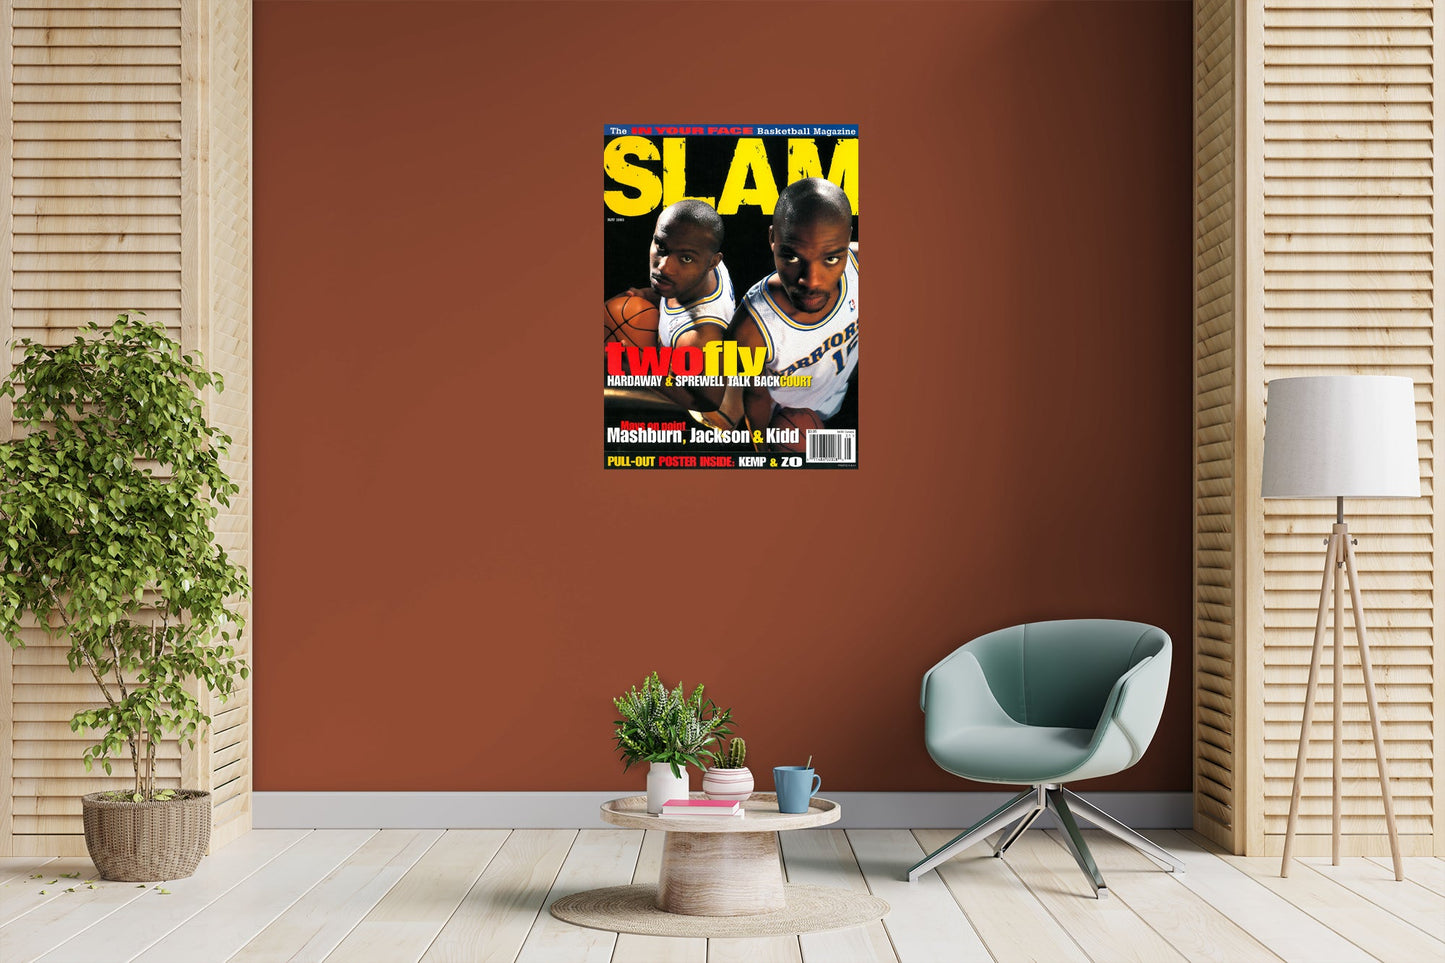 Golden State Warriors: Tim Hardaway and Latrell Sprewell SLAM Magazine May 1995 Cover Mural - Officially Licensed NBA Removable Adhesive Decal